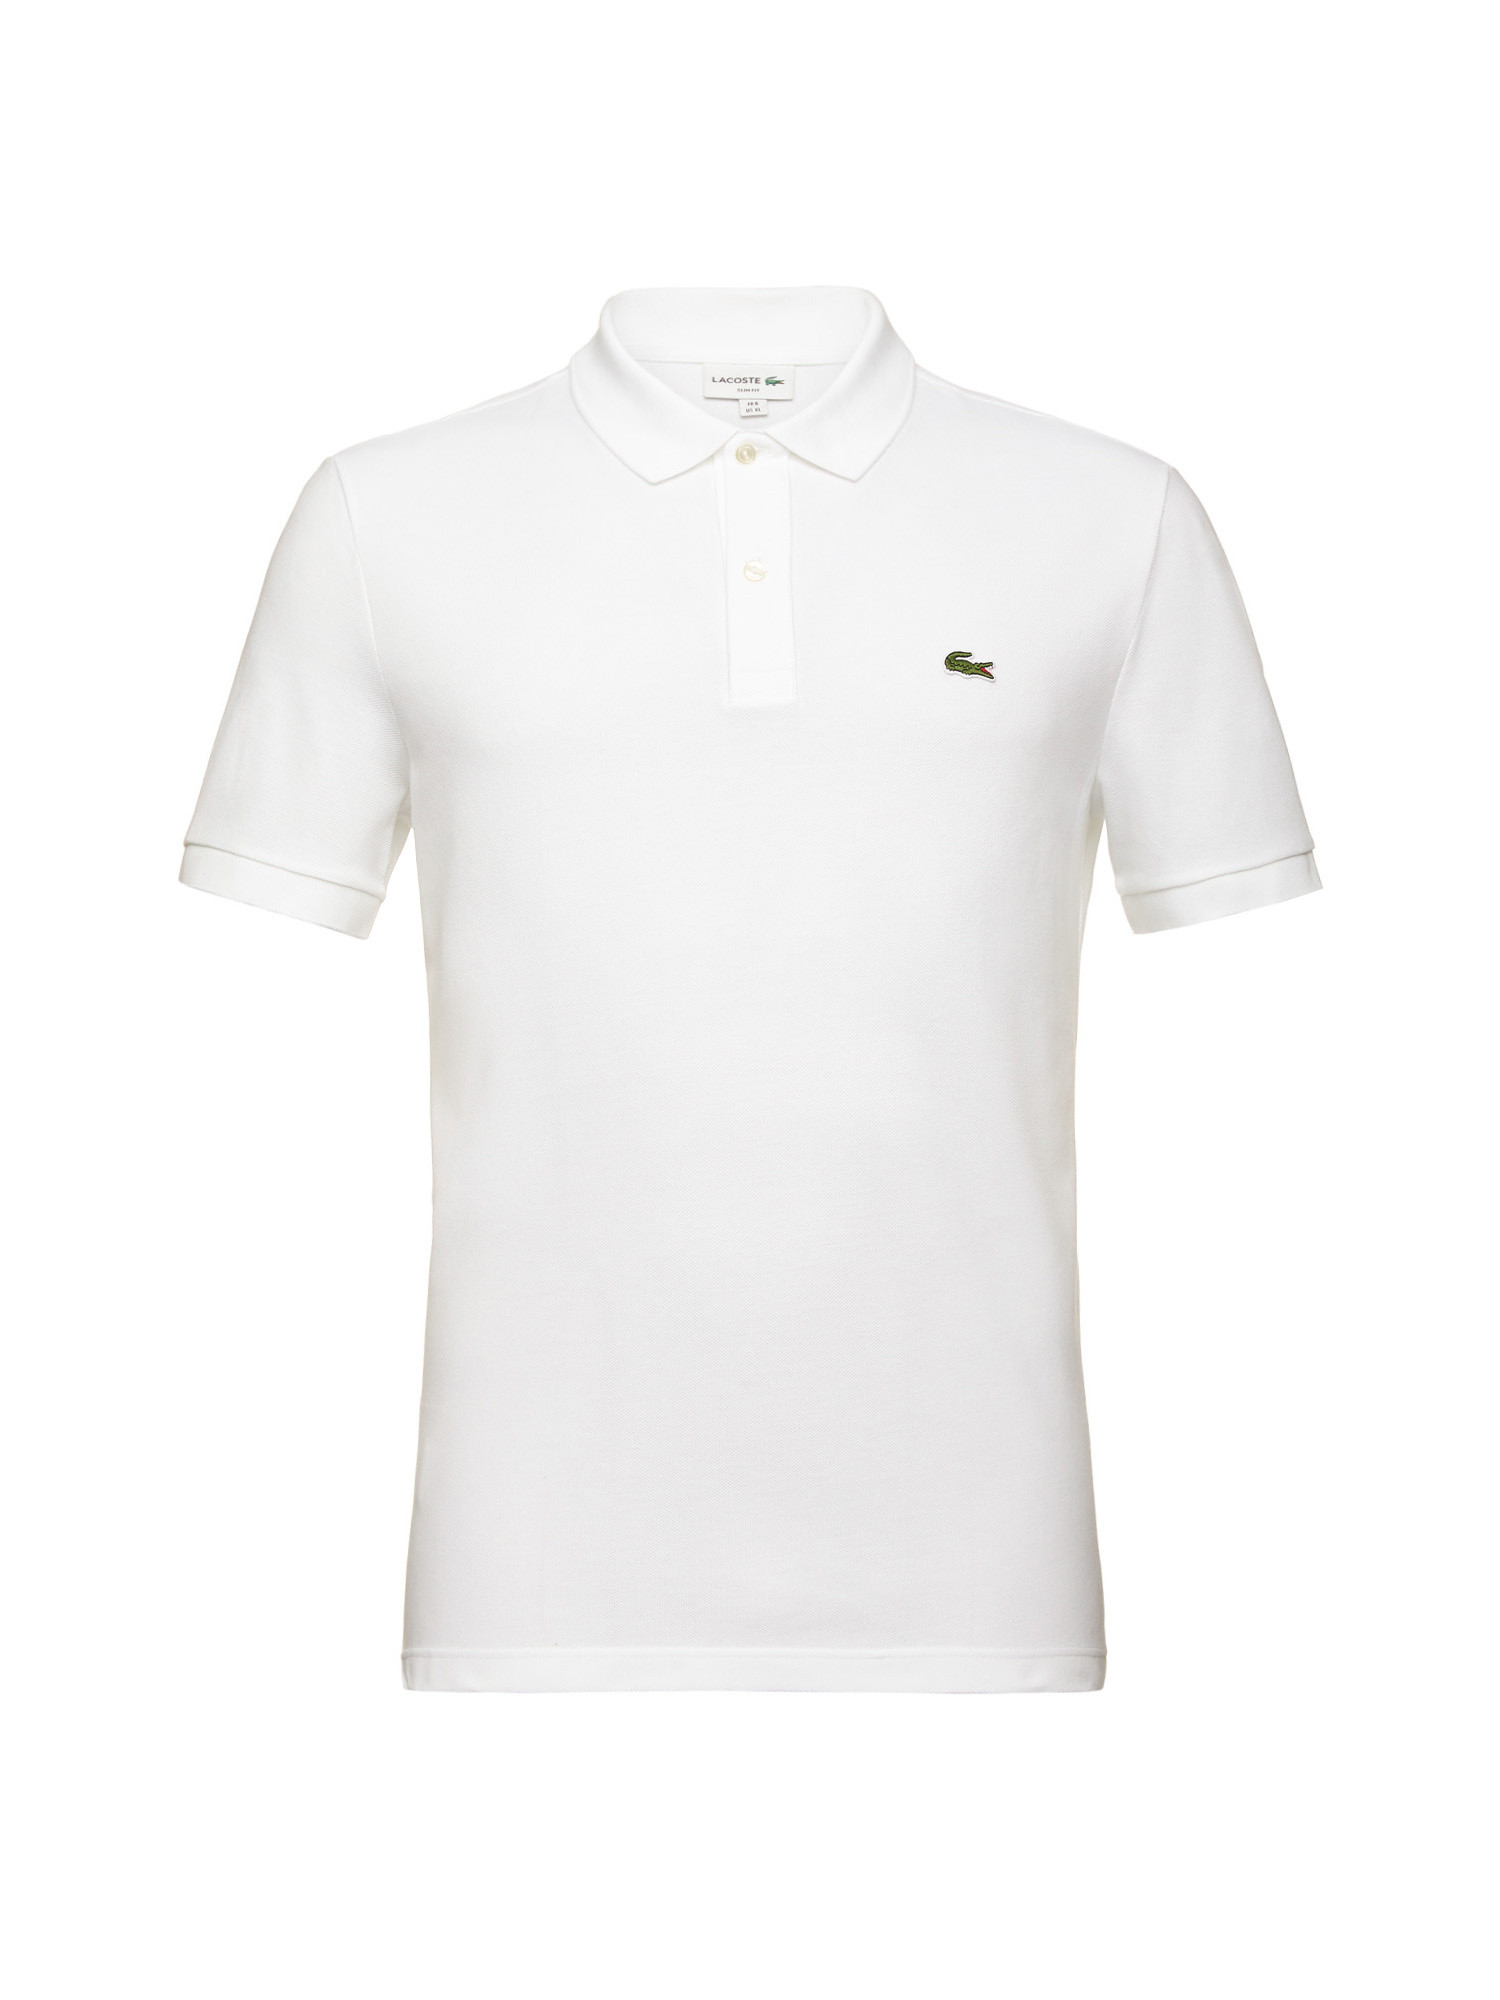 Lacoste - Slim-fit polo shirt in cotton petit piqué, White, large image number 0